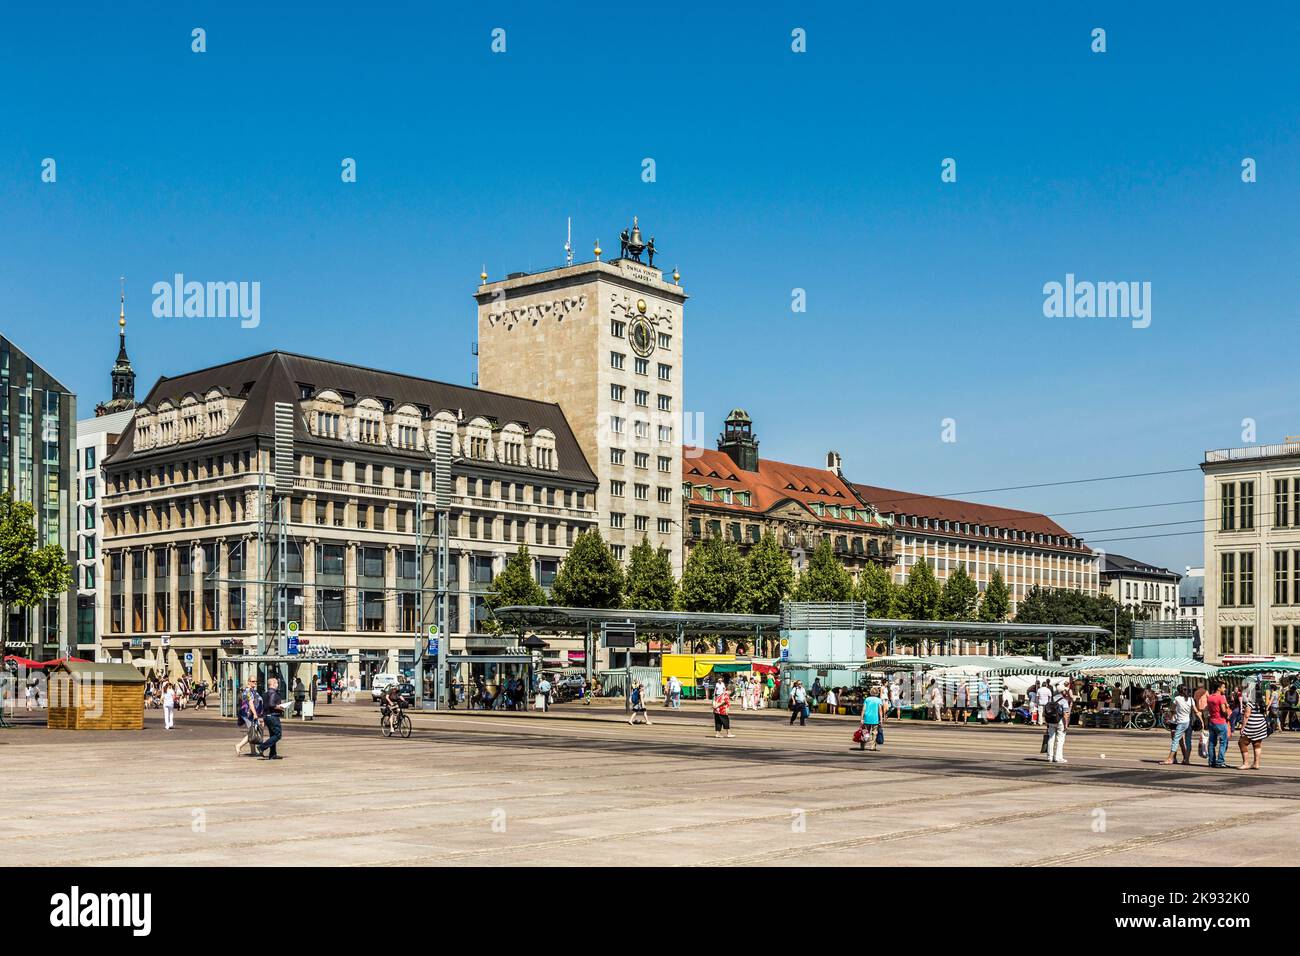 LEIPZIG, GERMANY - AUG 8, 2015: Old Town Hall in Leipzig with people at marketplace. In about 1165, Leipzig was granted municipal status and market pr Stock Photo